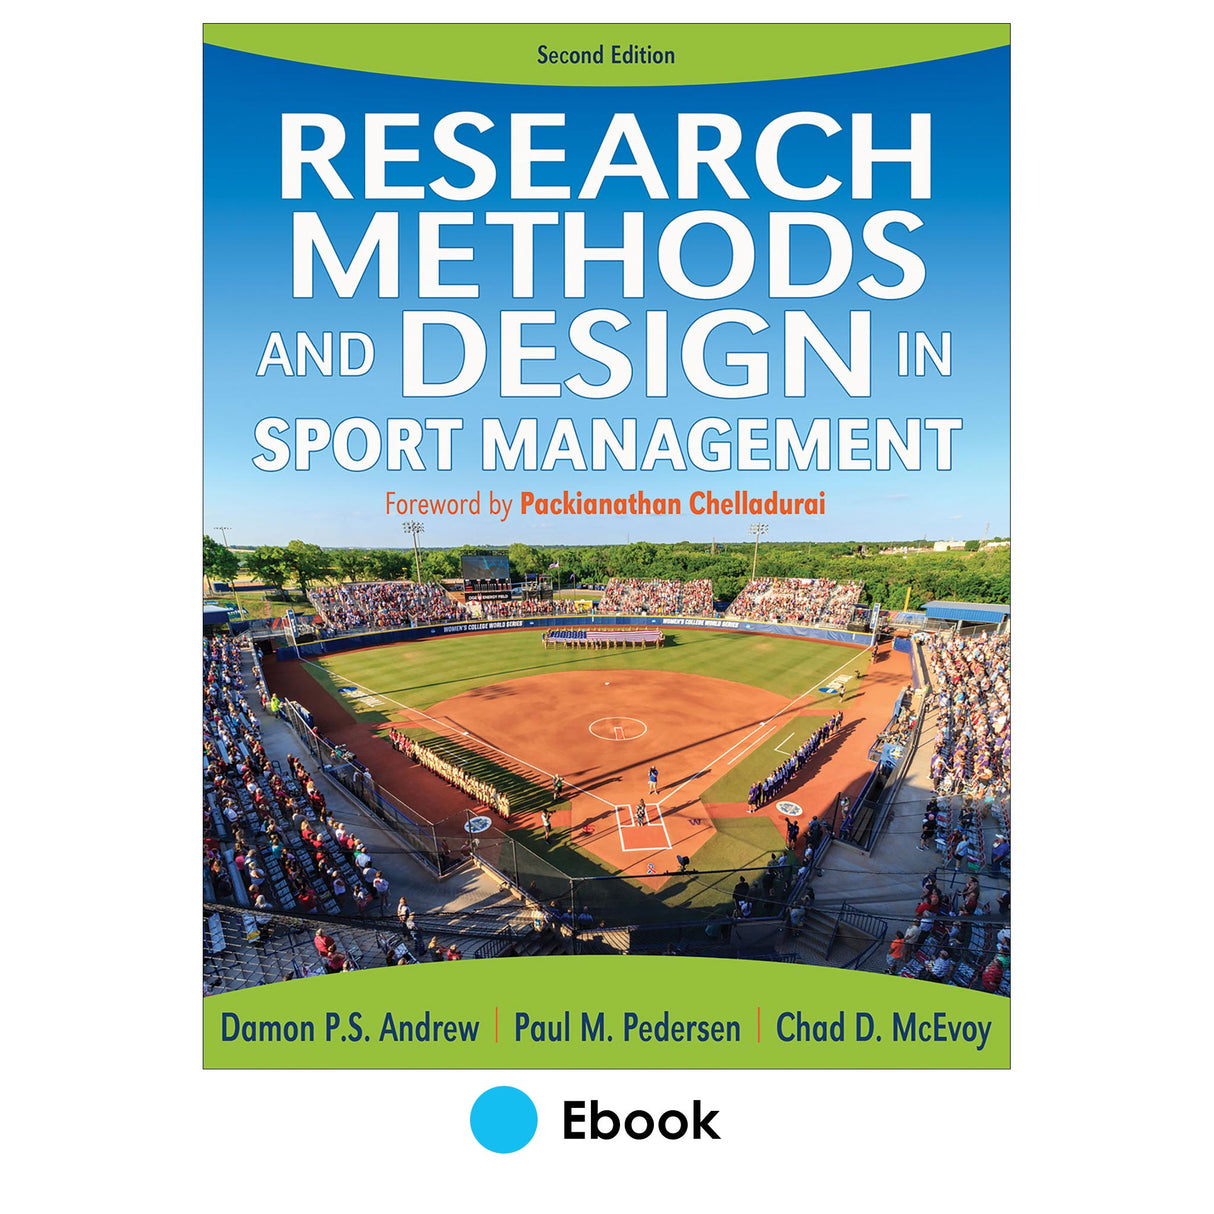 Research Methods and Design in Sport Management 2nd Edition epub With Web Resource